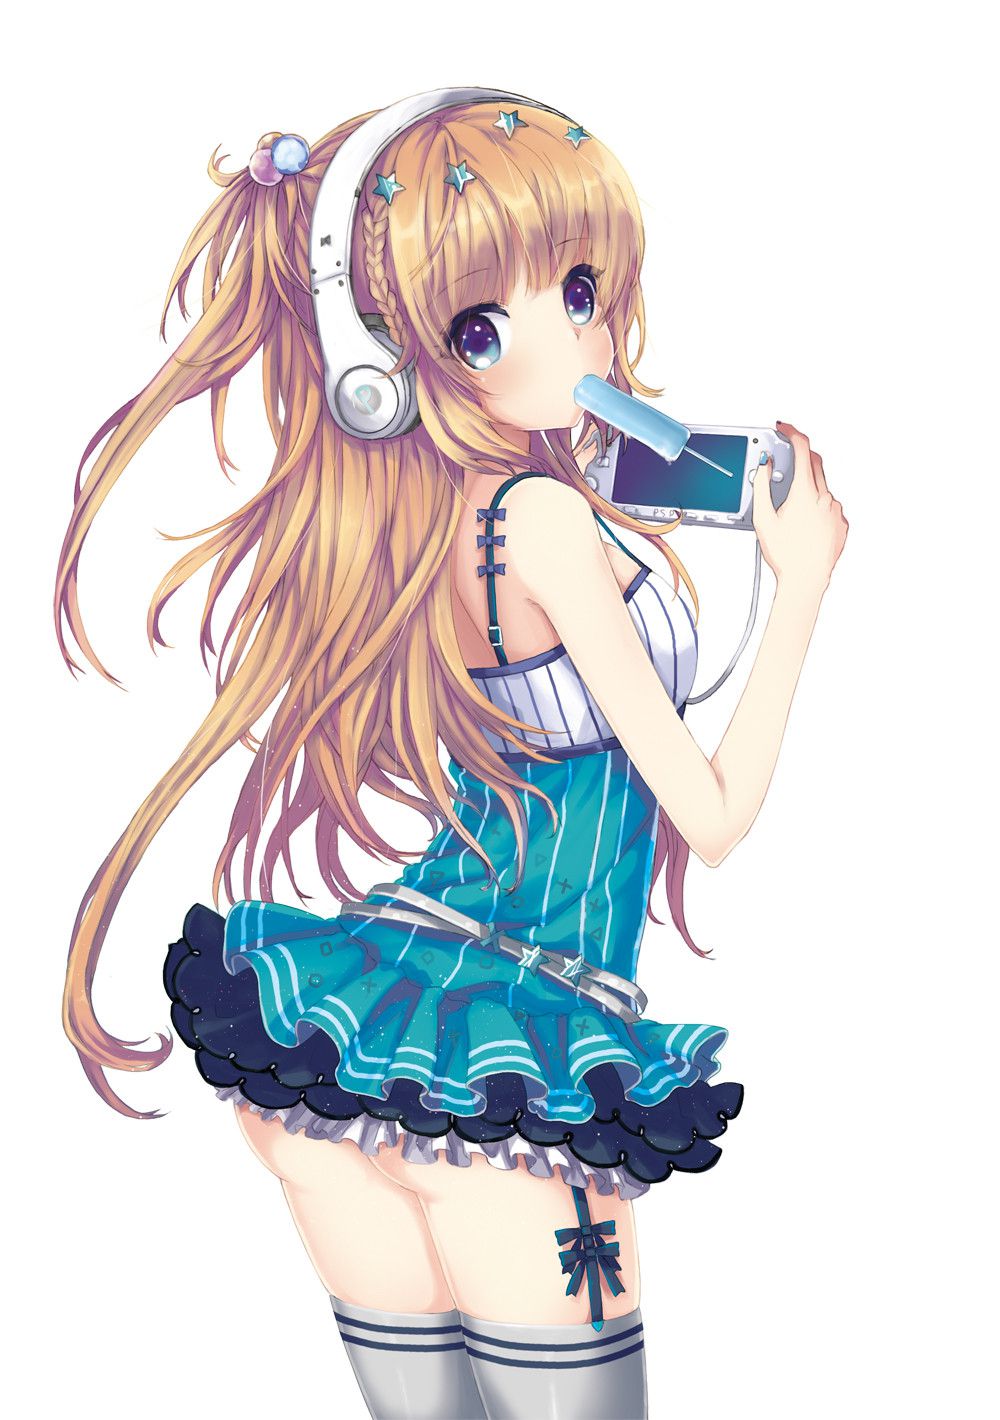 Drew trap picture or headphone girl えろあ. Vol.6 14